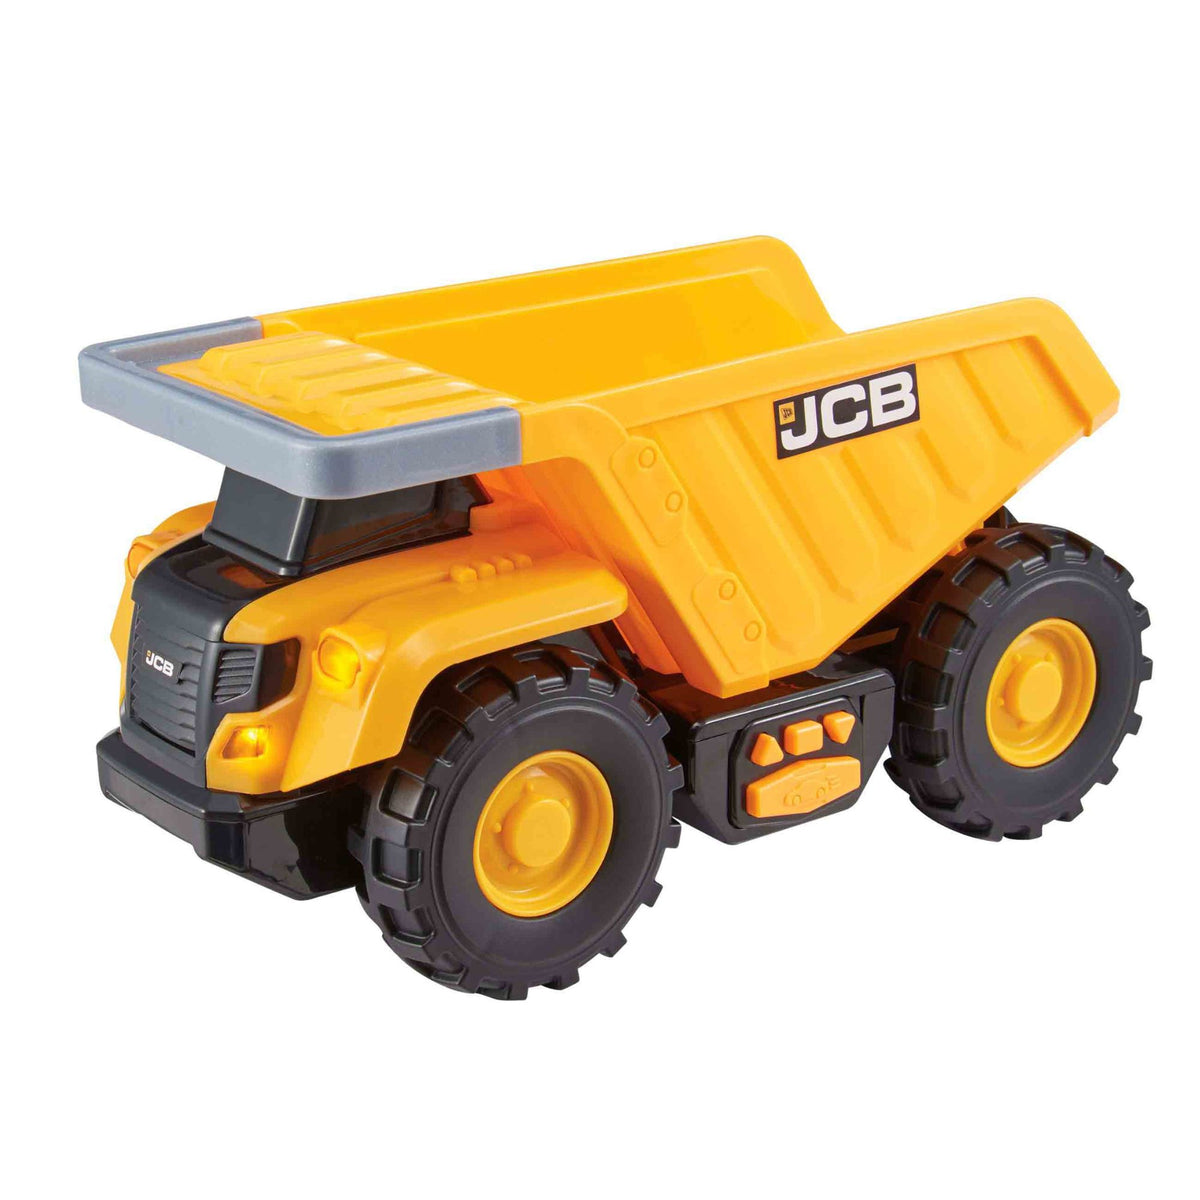 Teamsterz JCB Mighty Moverz Dump Truck Toy